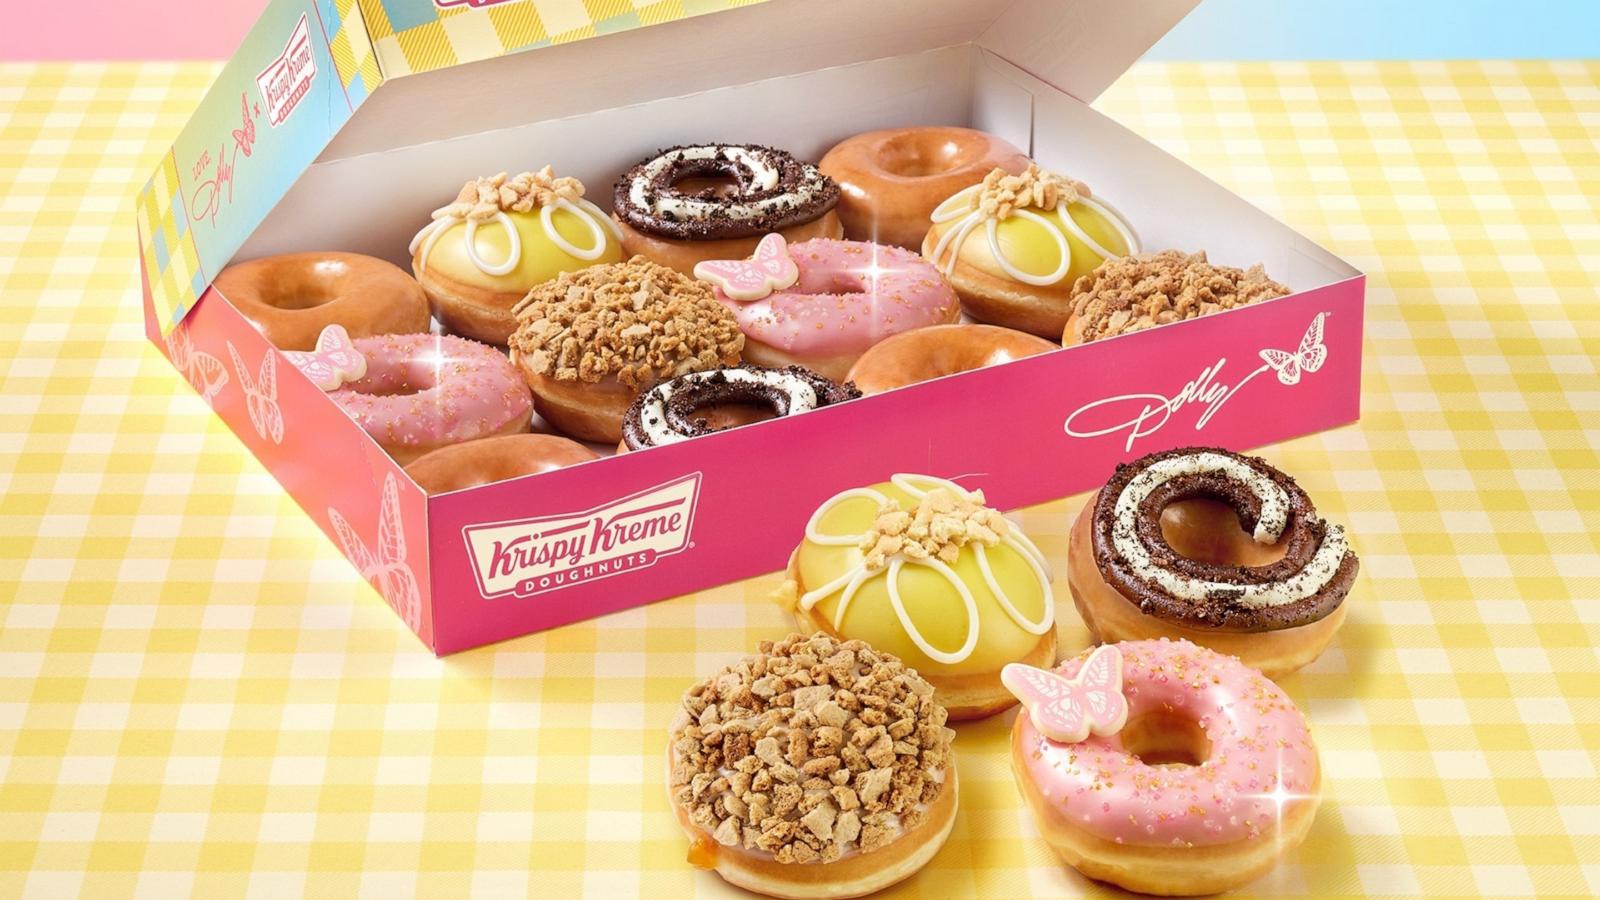 PHOTO: Krispy Kreme teamed up with Dolly Parton to create a new limited-edition Southern Sweets Doughnut Collection with four new doughnuts.